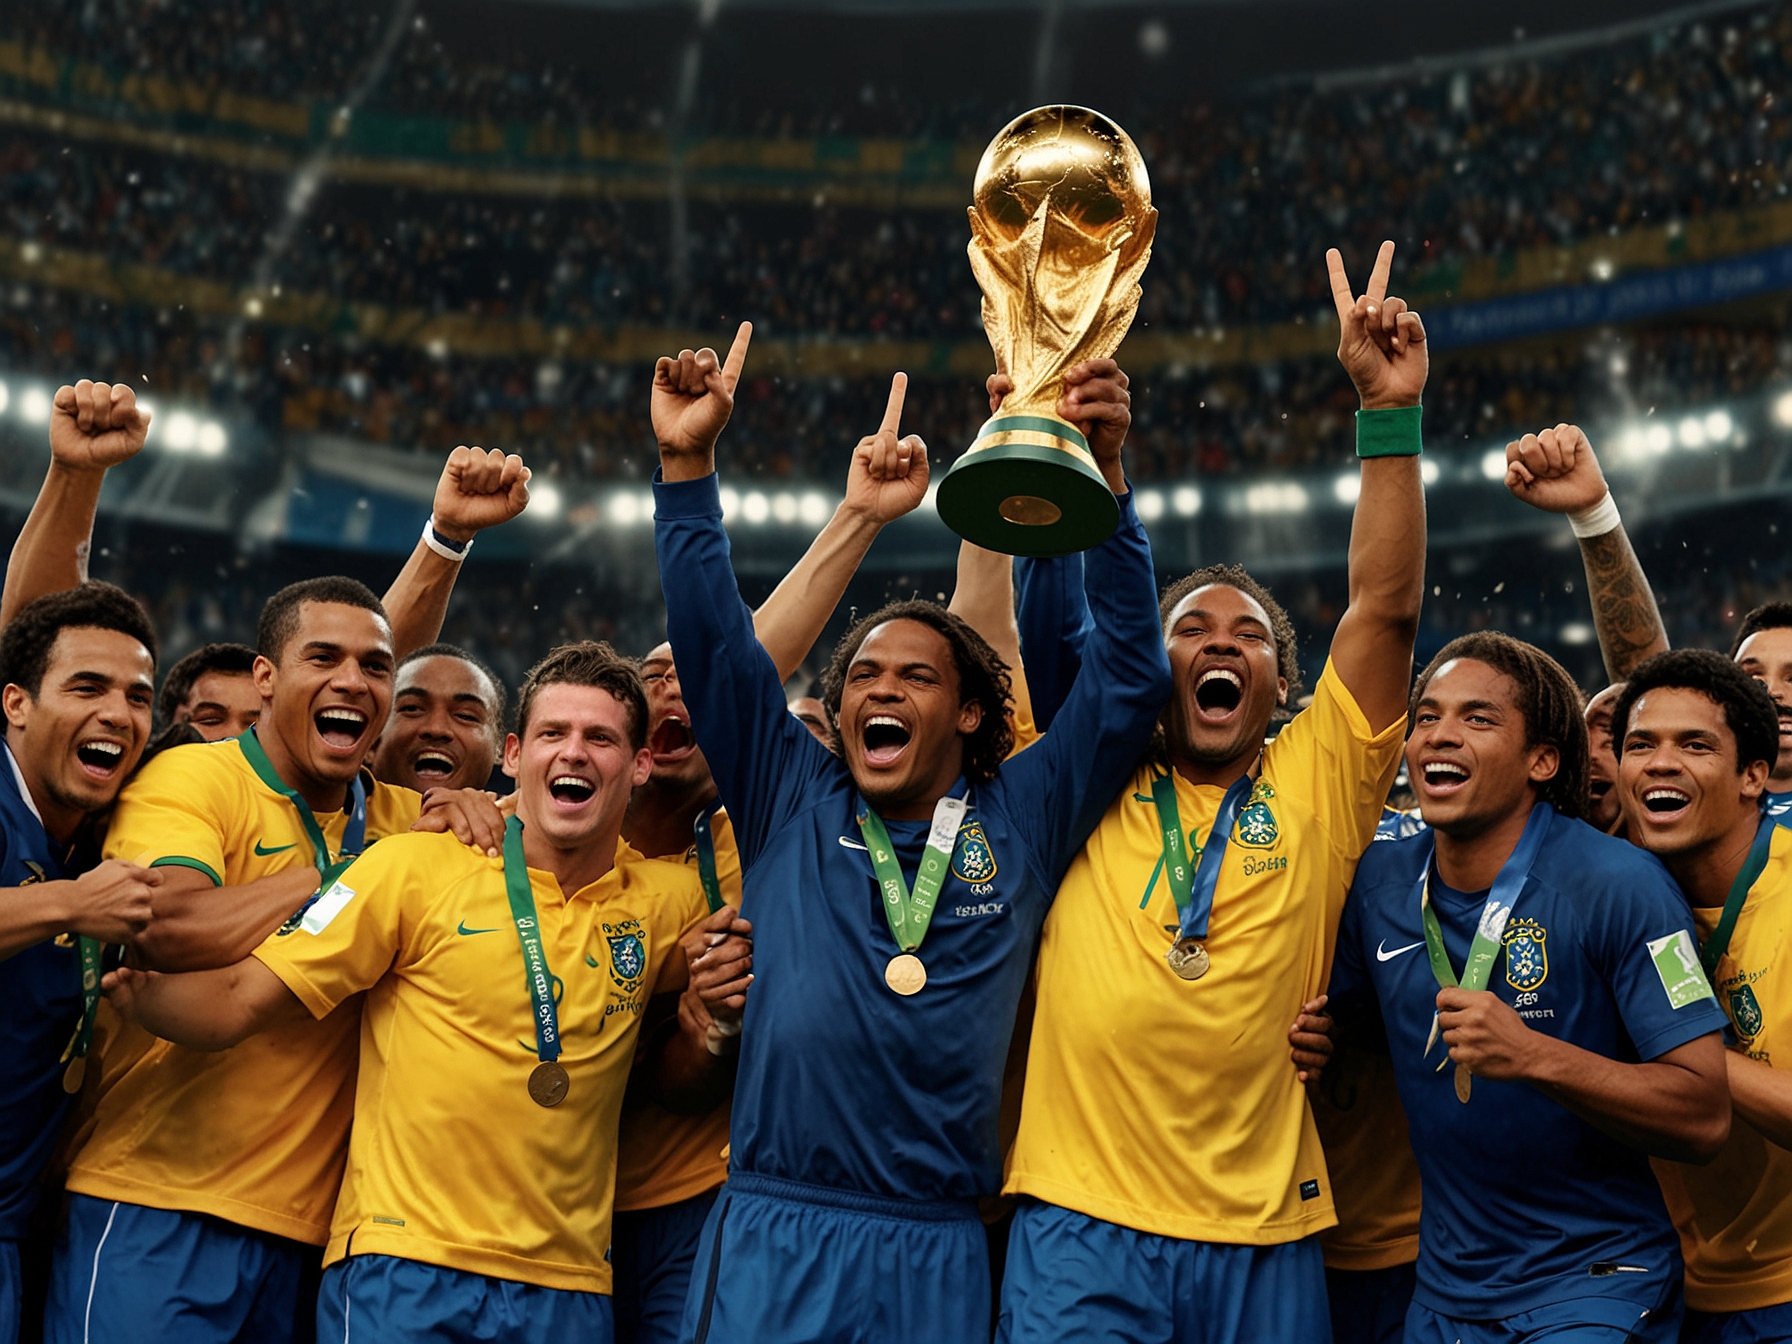 The iconic Brazil 2002 World Cup squad, celebrating their victory with the trophy in Yokohama. Featured prominently are key players like Ronaldo, Rivaldo, Ronaldinho, and captain Cafu.